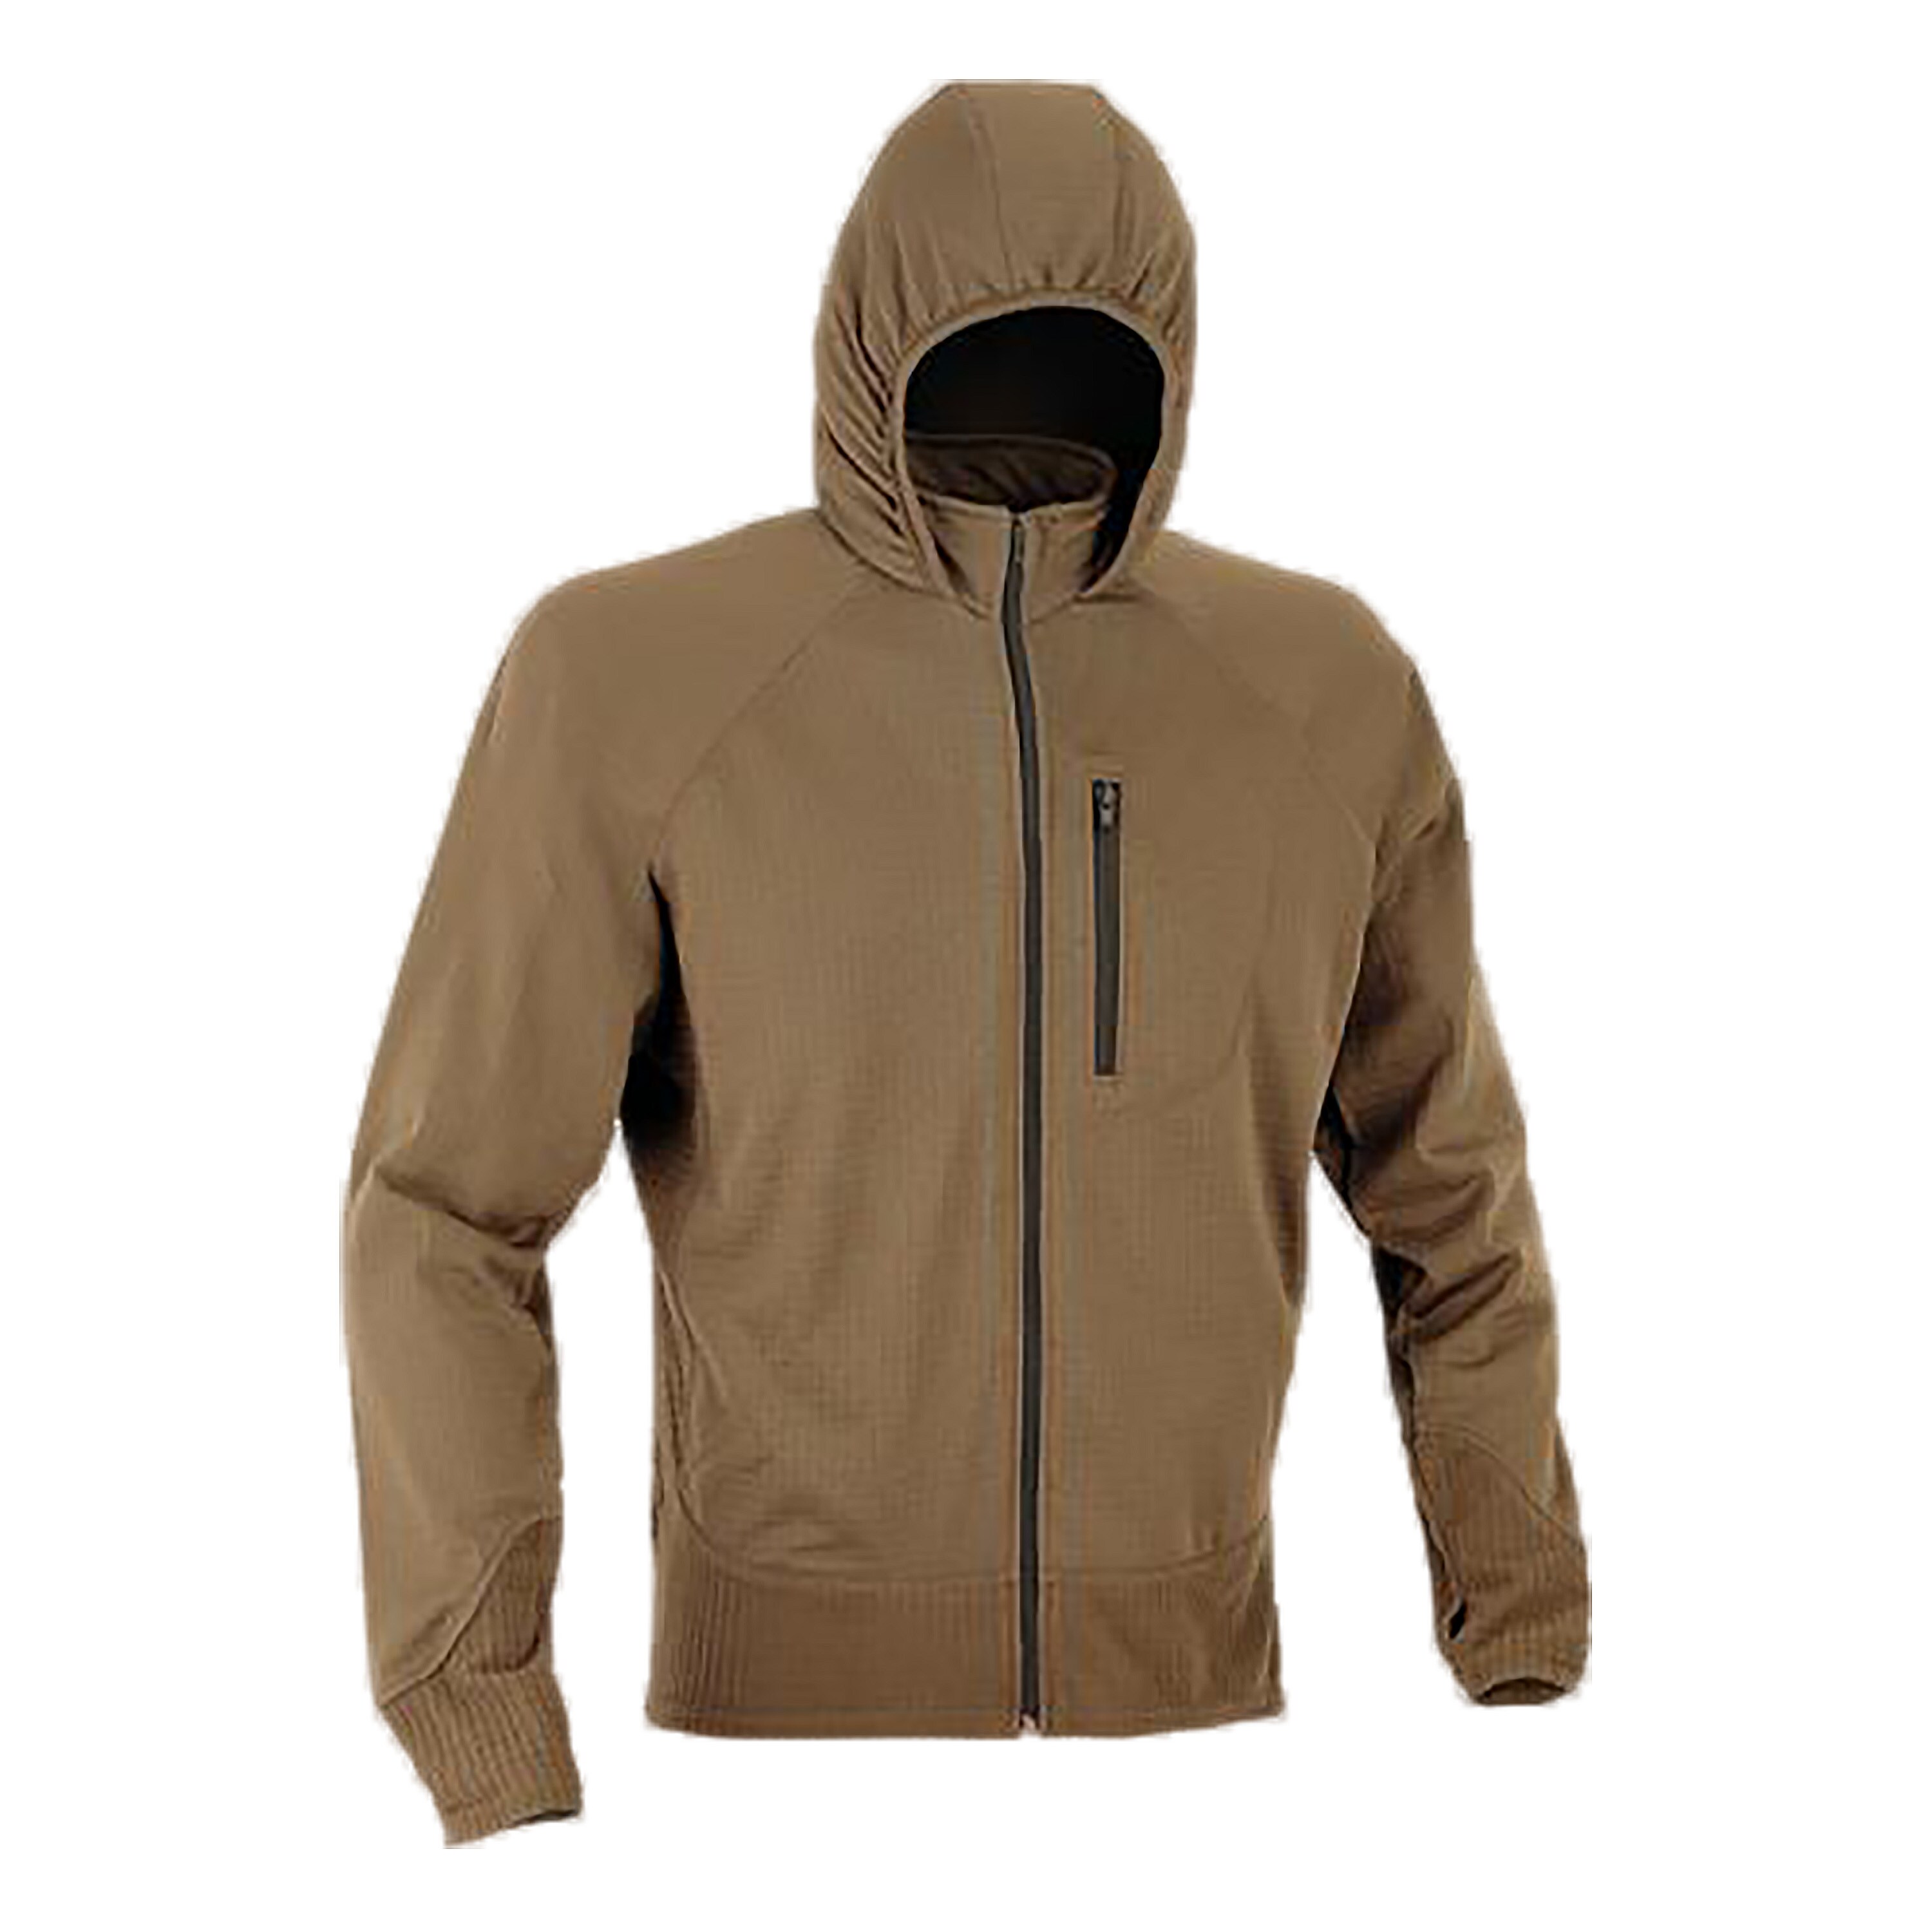 Purchase the Defcon 5 Fleece Jacket Tactical with Hood coyote by